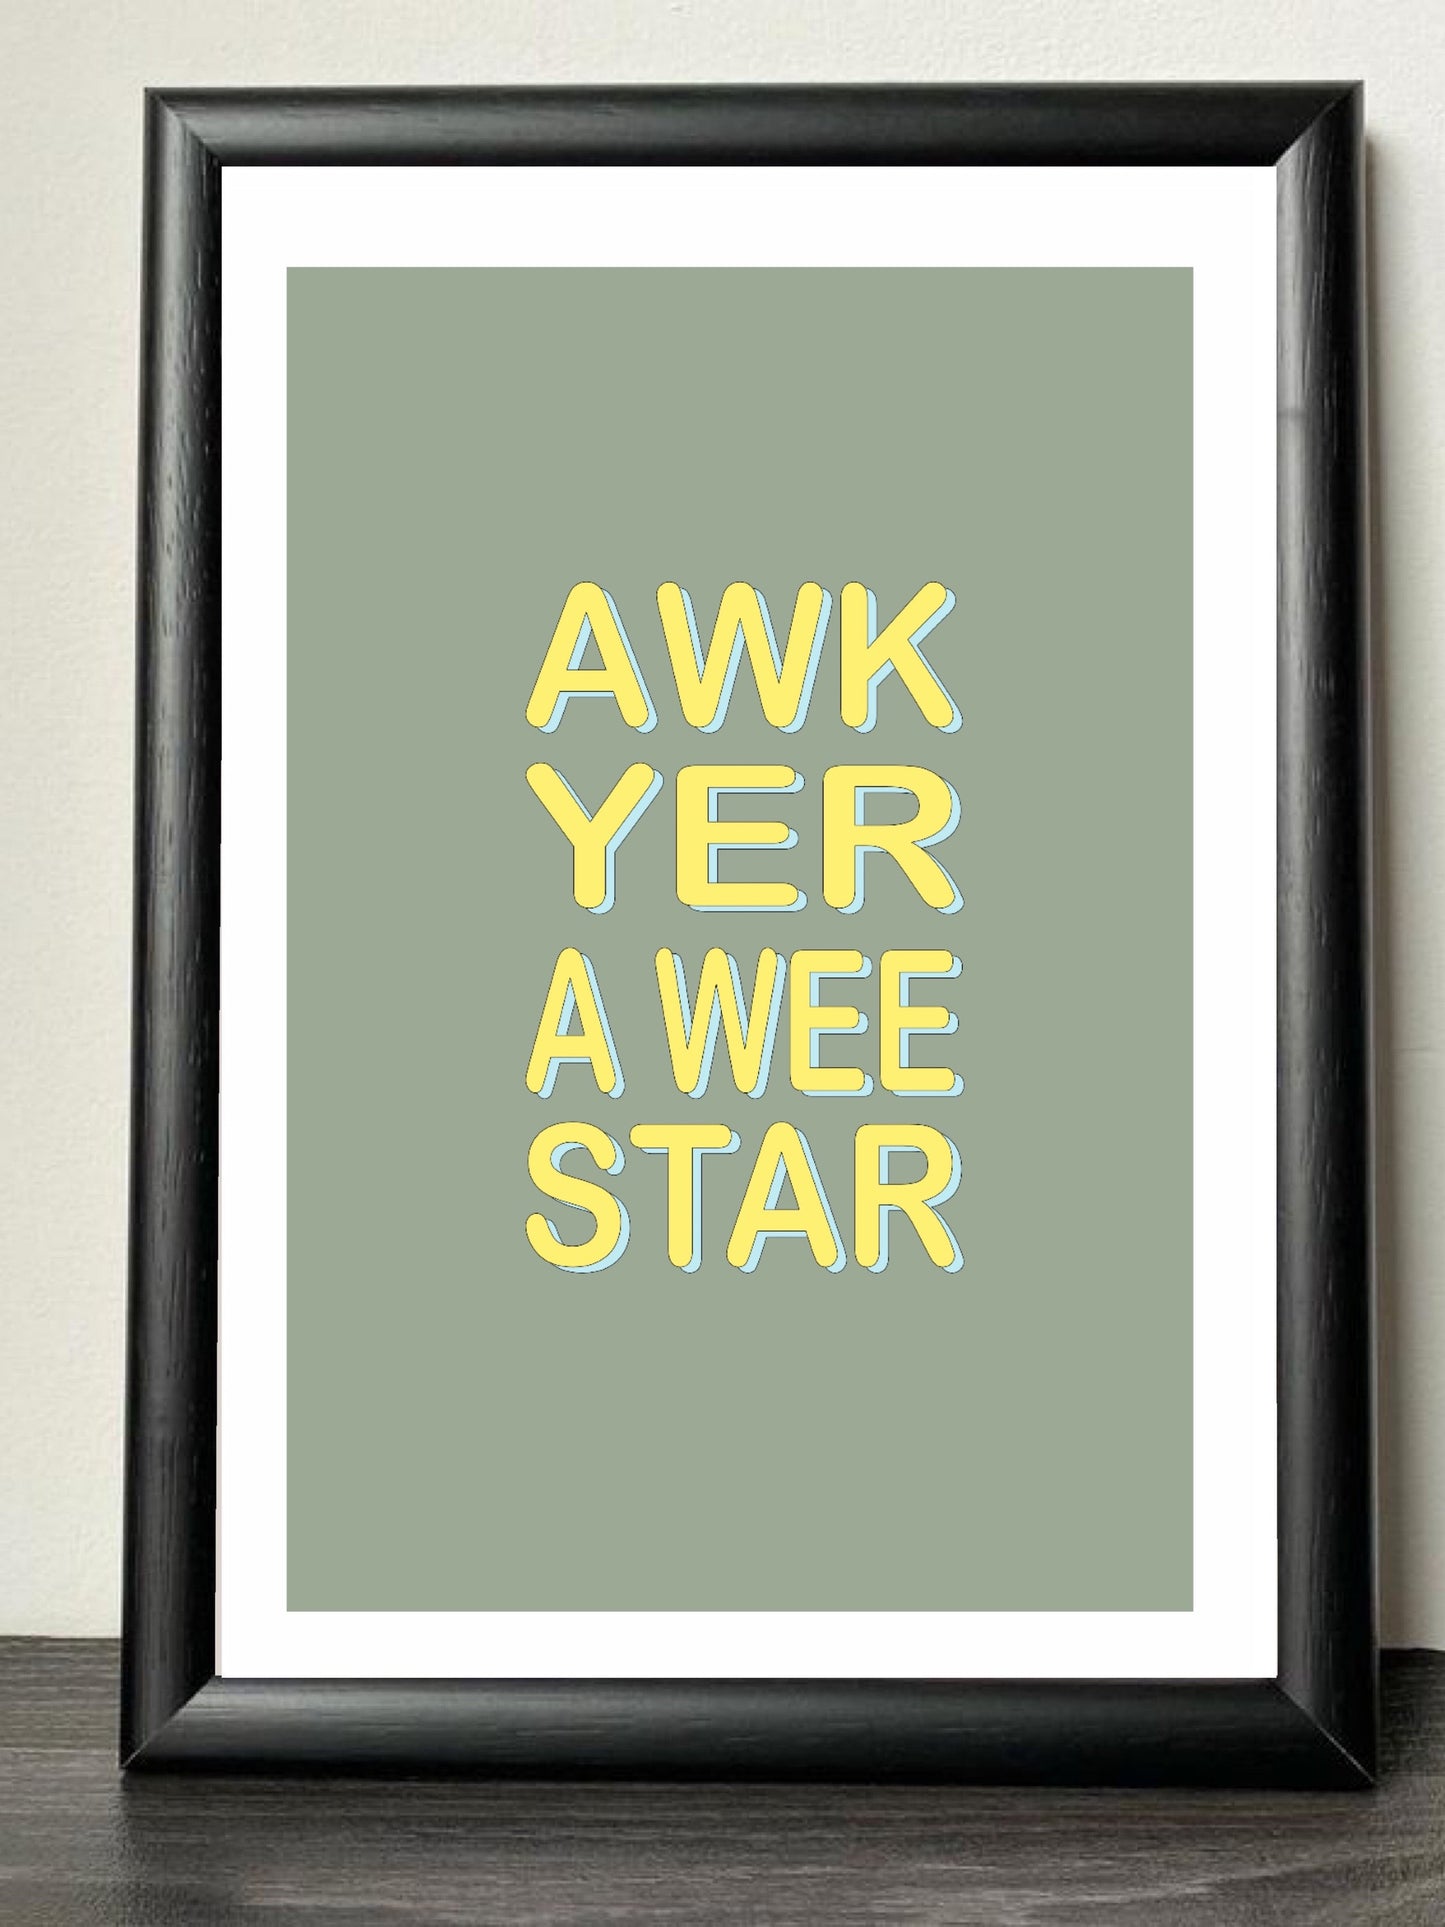 Awk yer a wee star